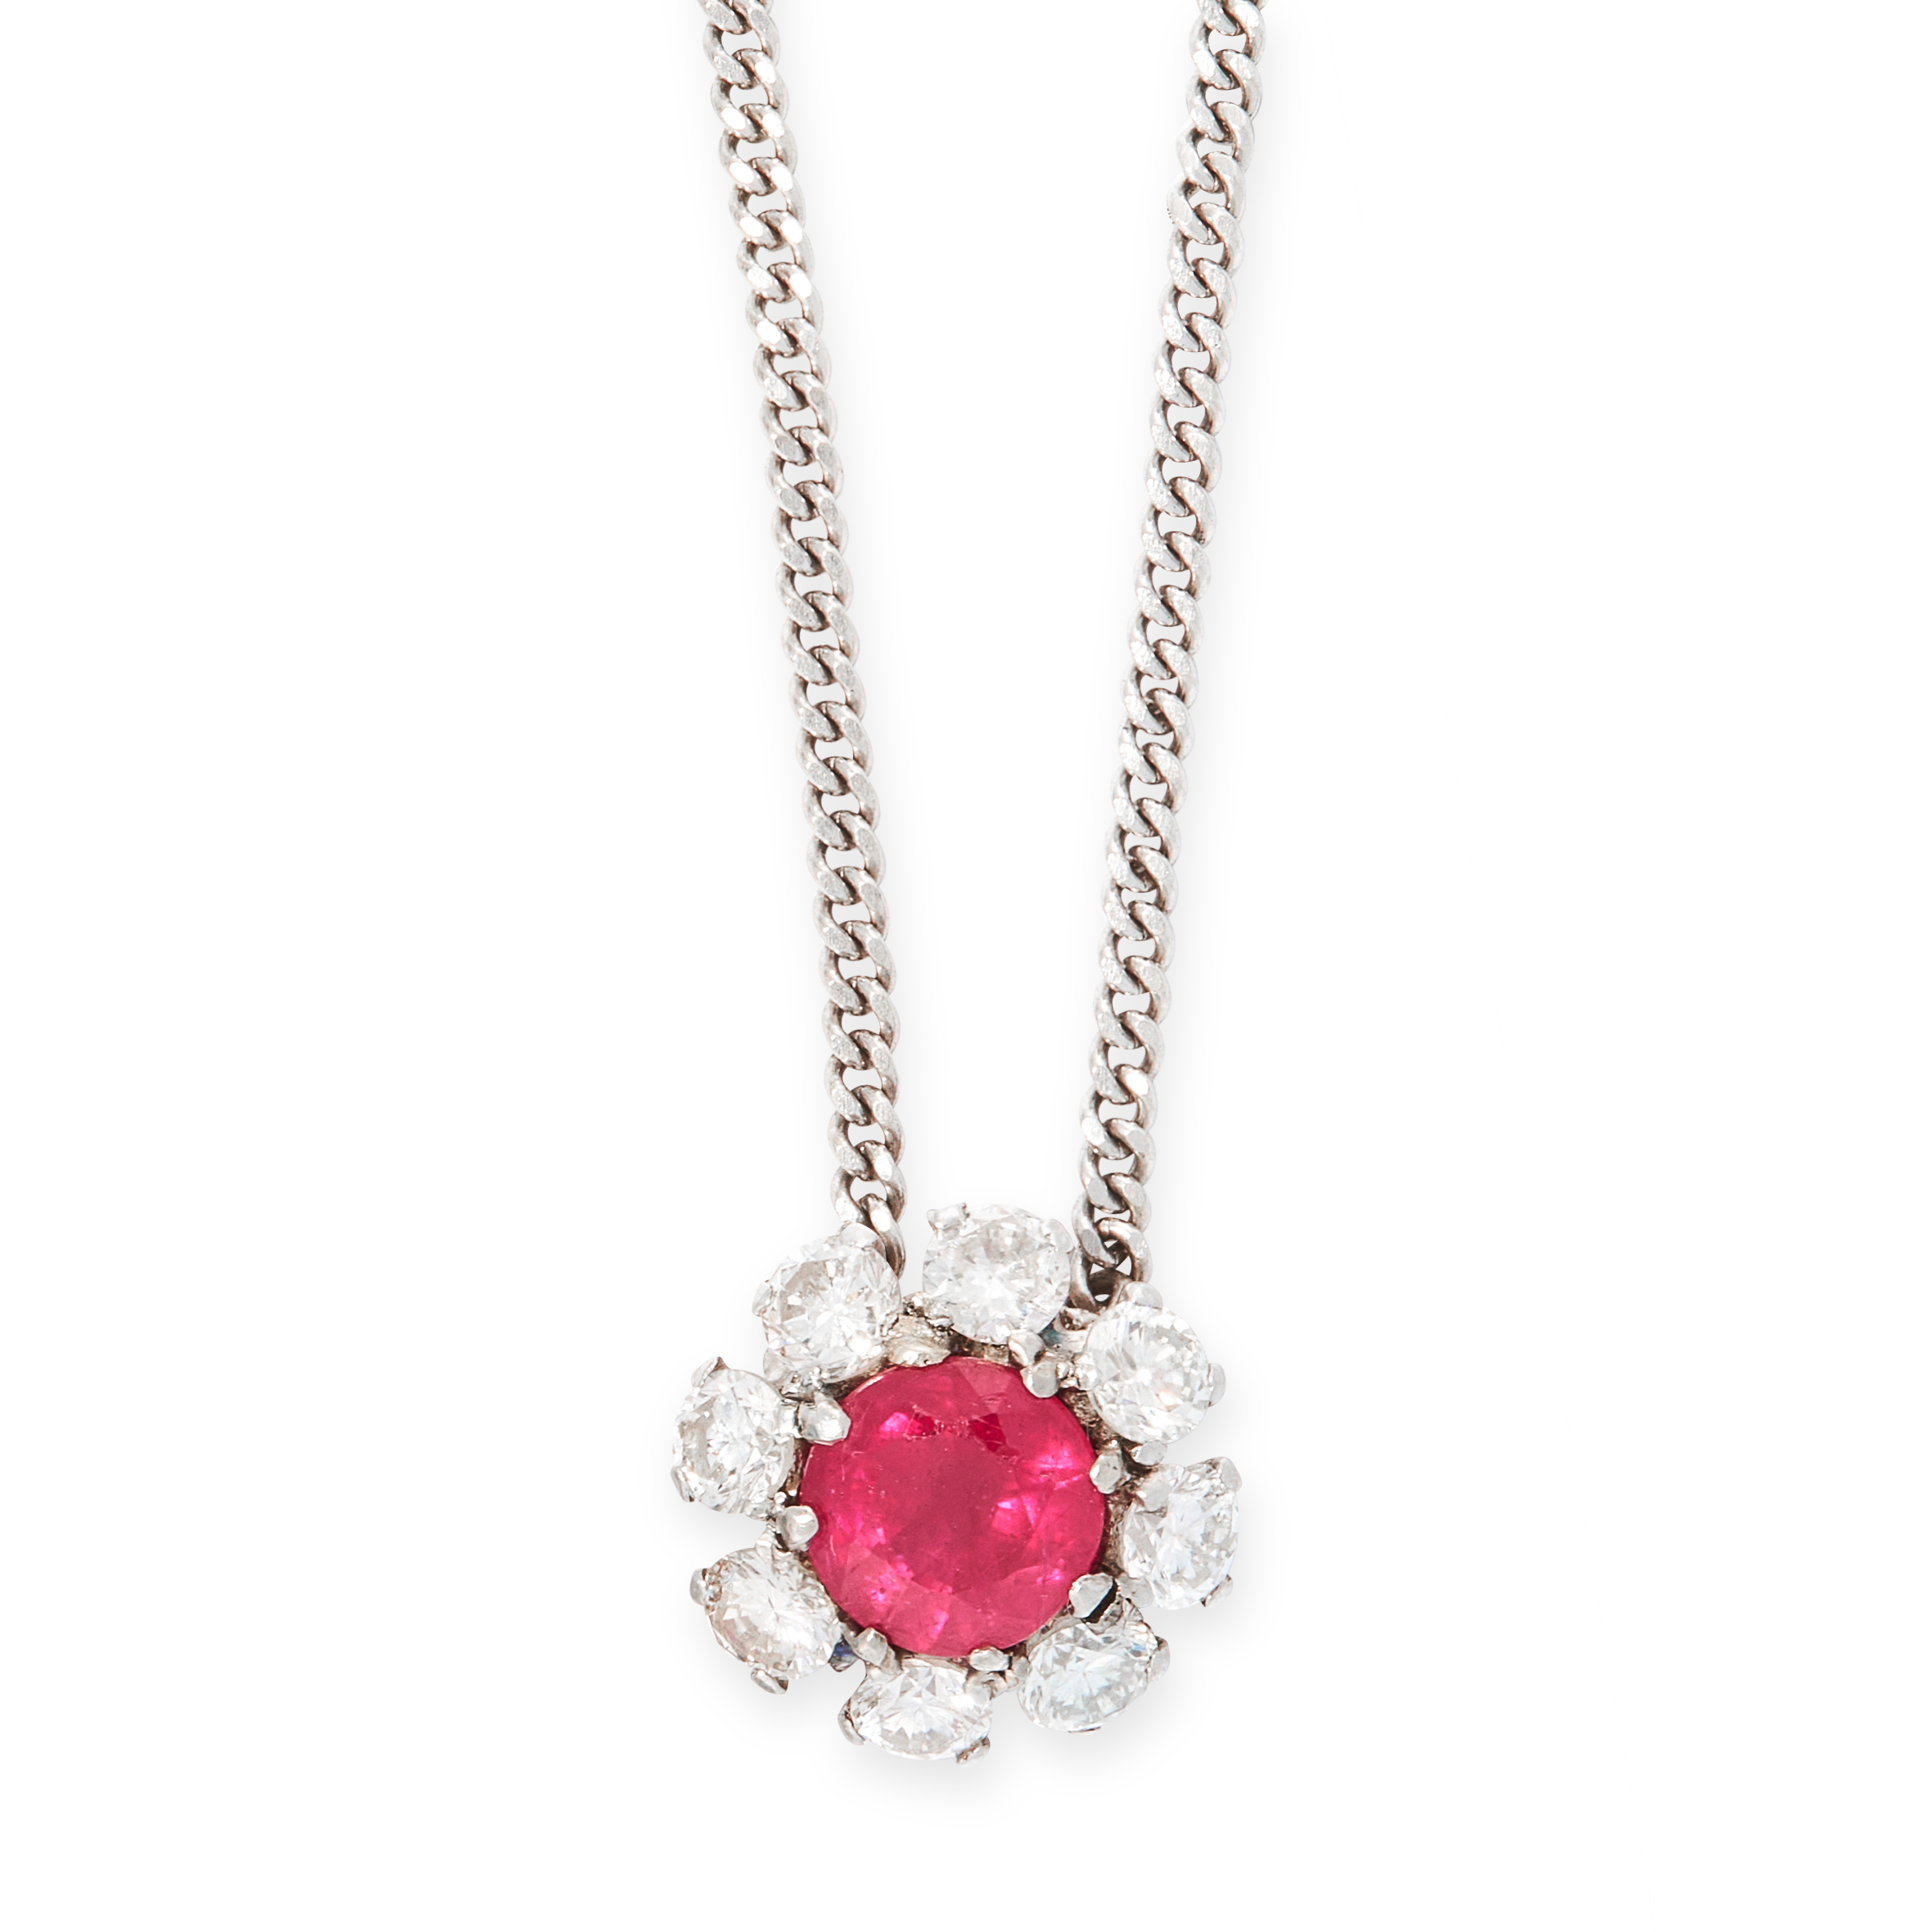 A RUBY AND DIAMOND PENDANT NECKLACE in 18ct white gold, set with a round cut ruby of 1.22 carats